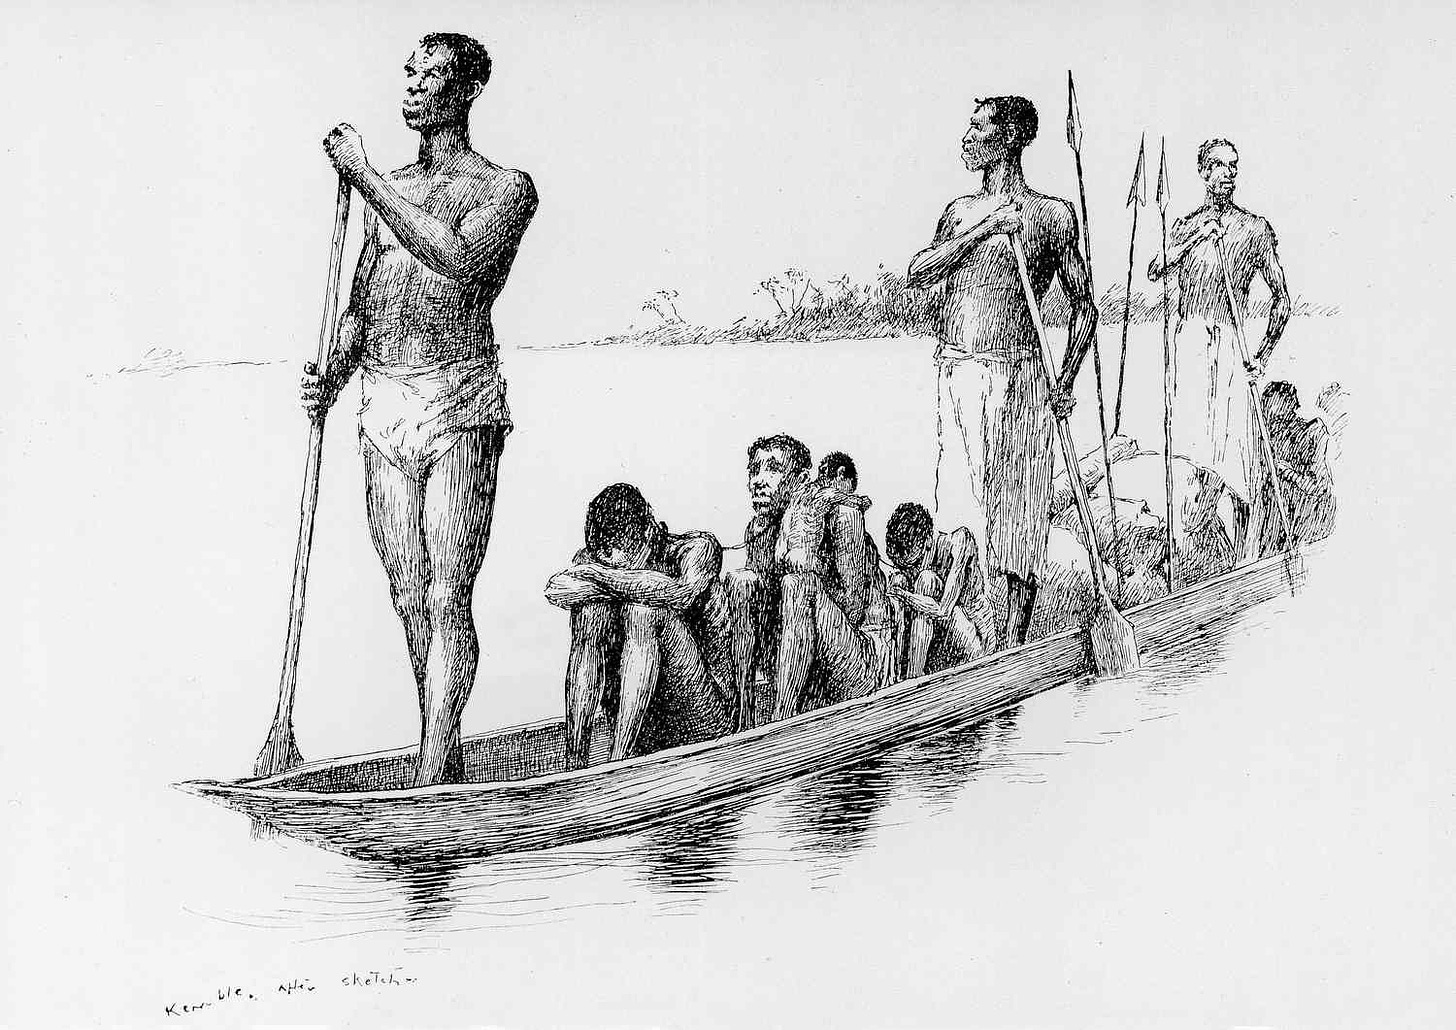 A History of African Traders of Enslaved People